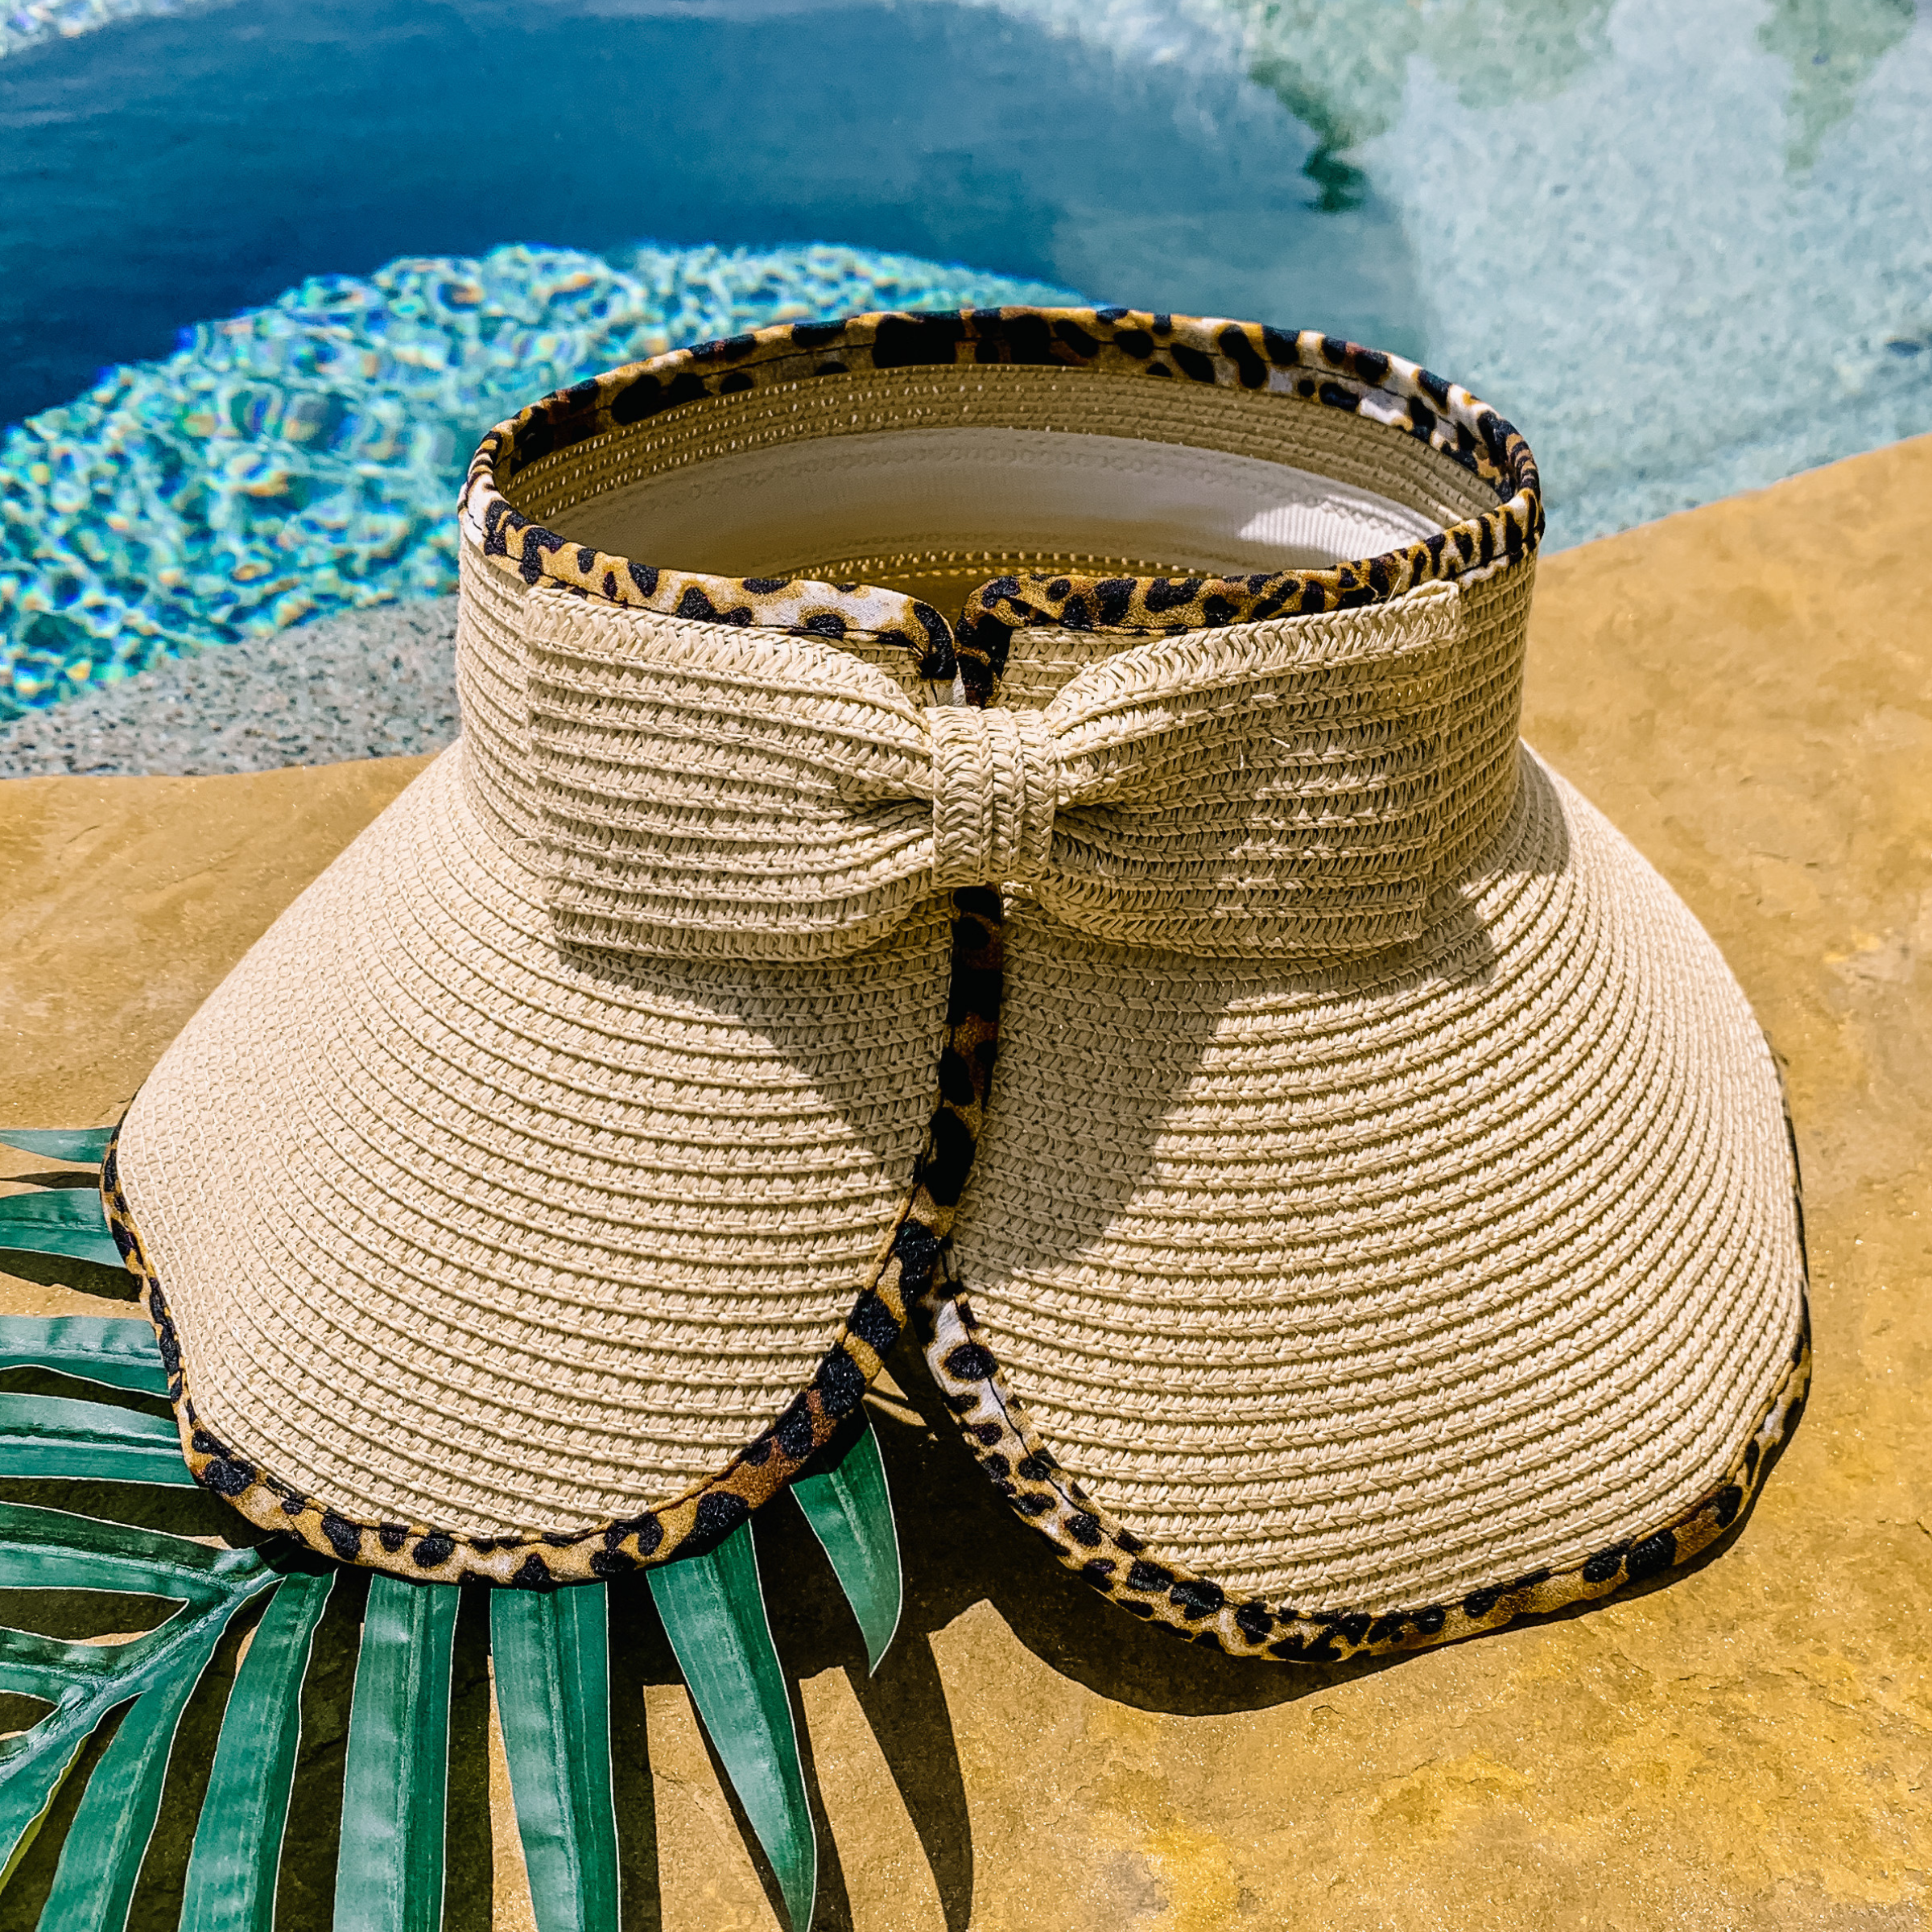 Poolside Chic Velcro Sun Visor in Natural with Leopard Print Trim - Giddy Up Glamour Boutique